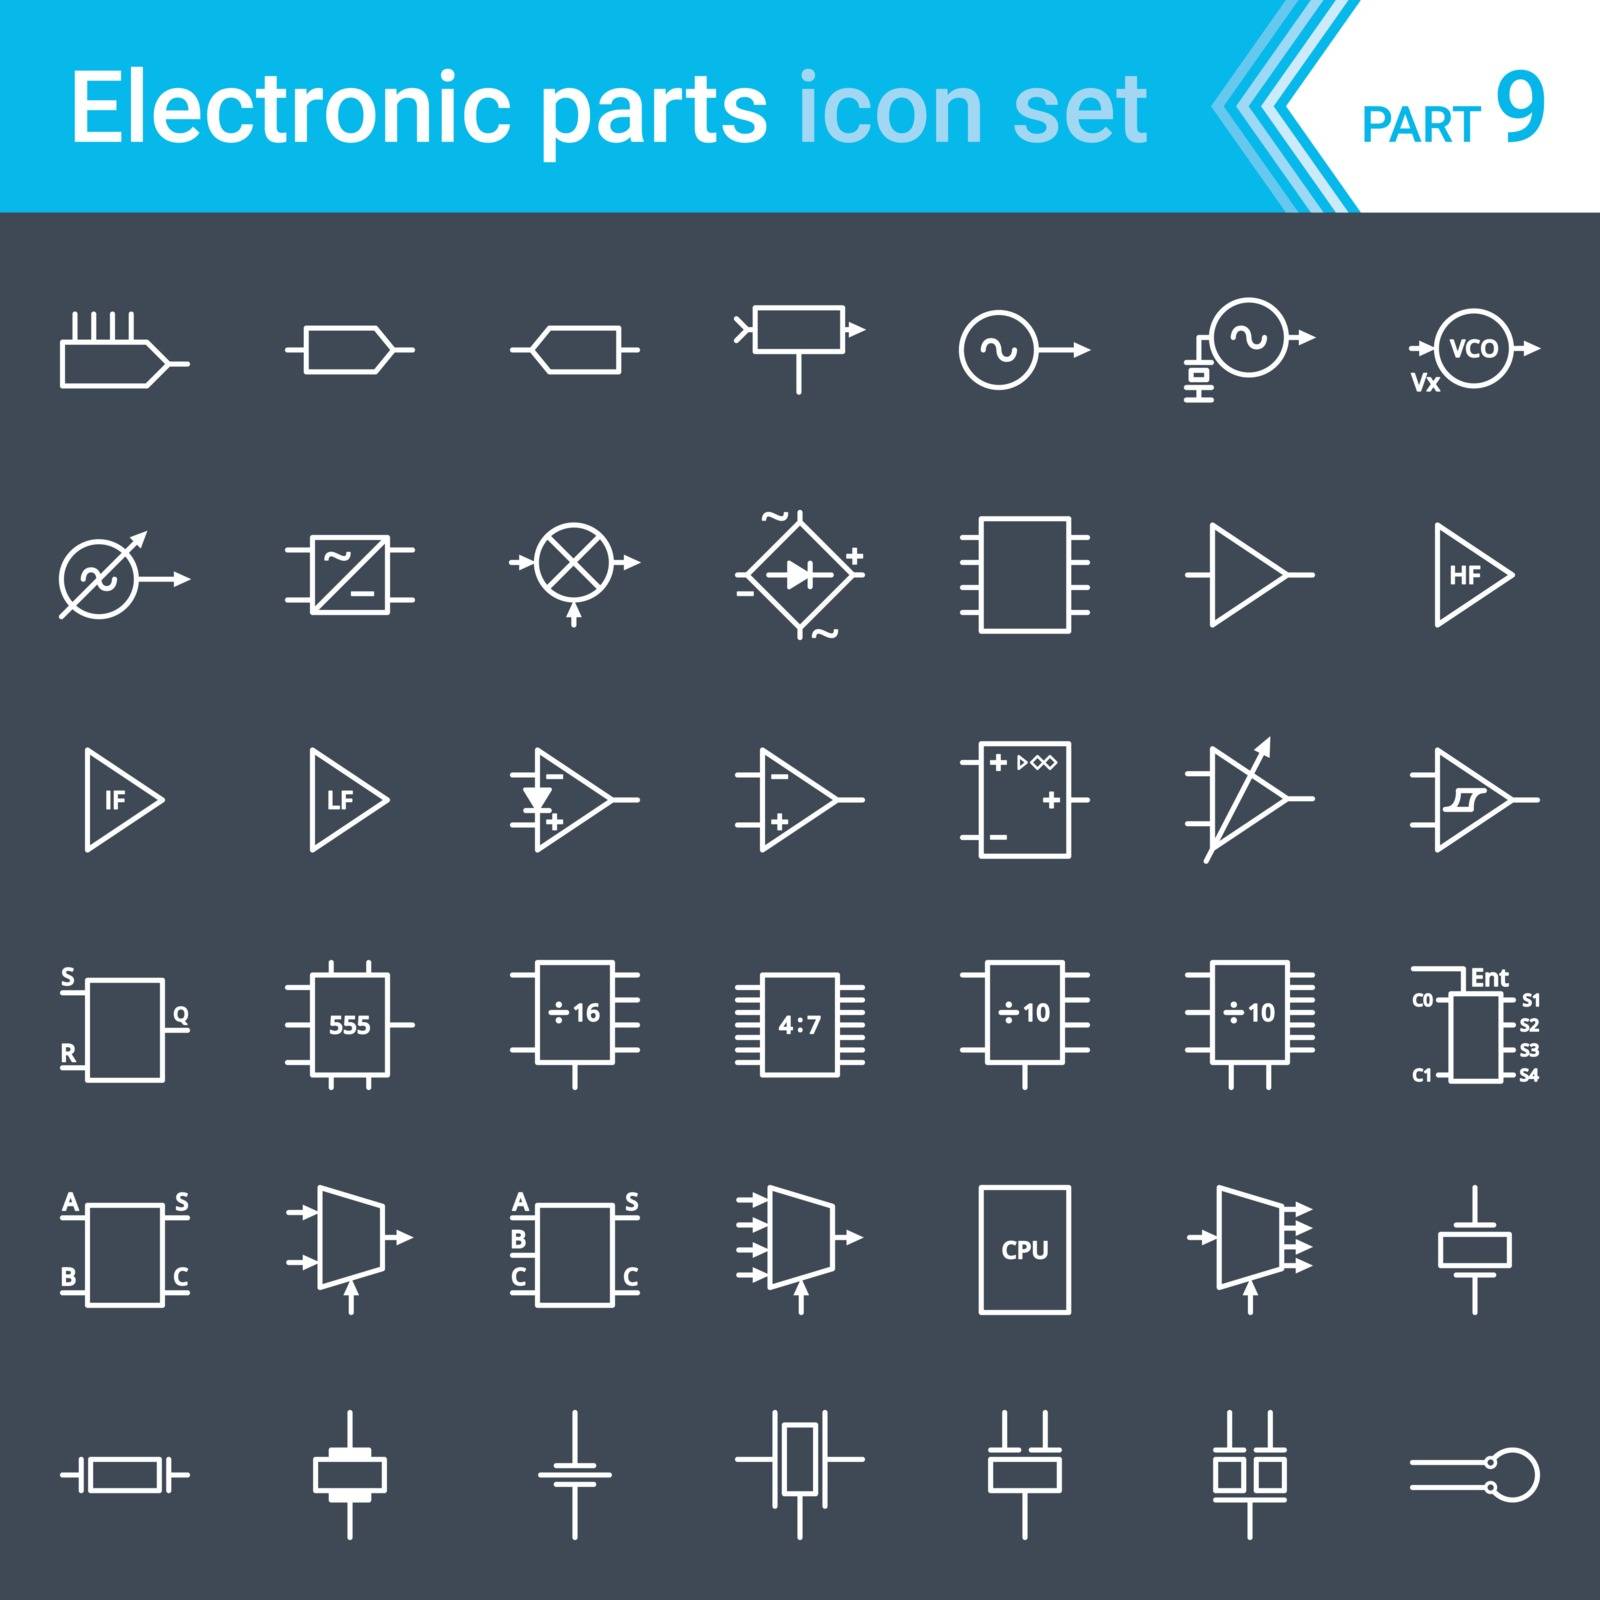 Electric and electronic icons, electric diagram symbols. Circuitry, blocks, stages, amplifier, logic circuits, piezoelectric crystals and crystal oscillators. by vermicule